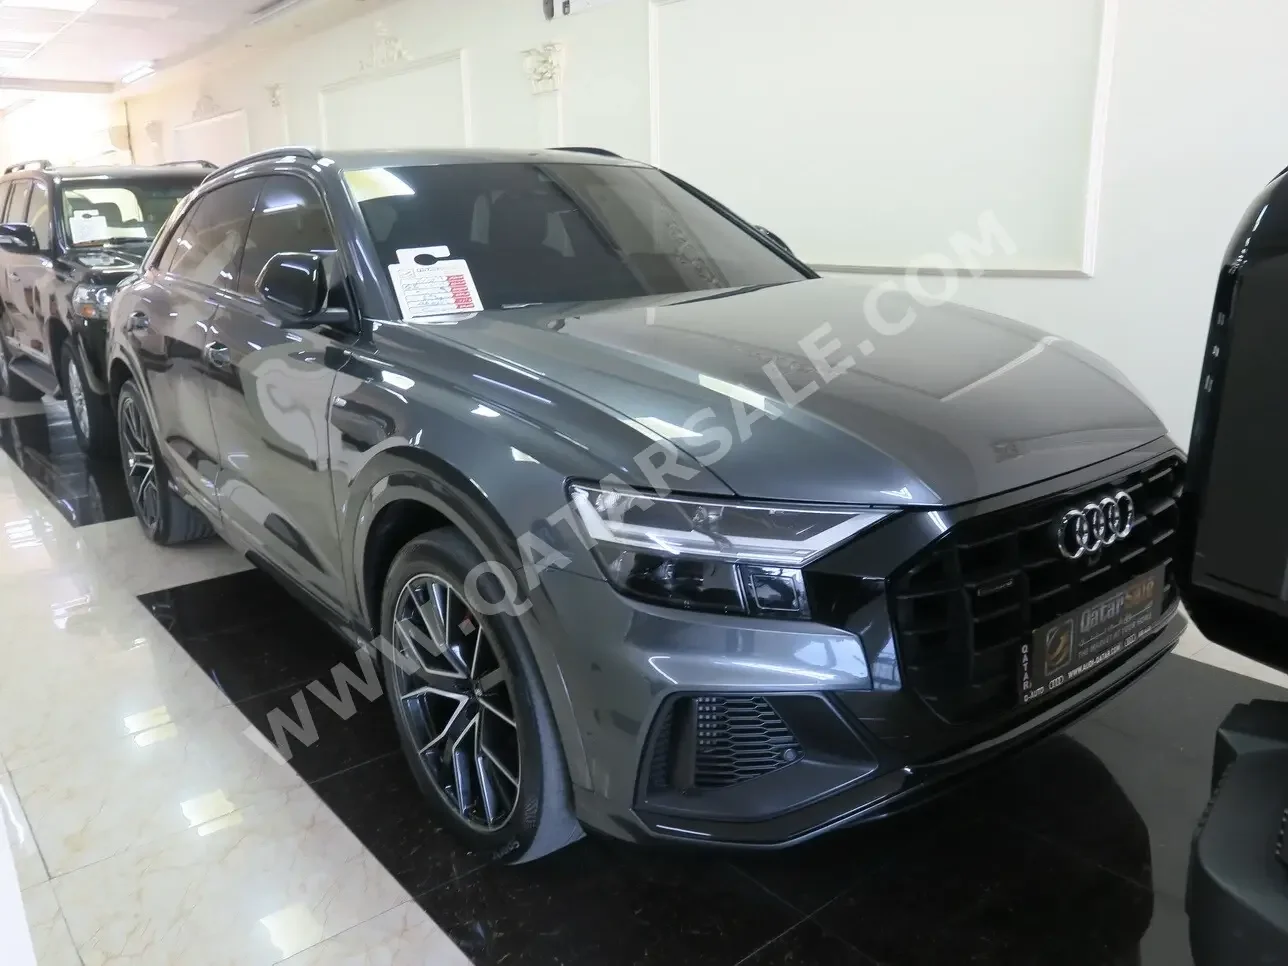  Audi  Q8  2019  Automatic  86,000 Km  6 Cylinder  Four Wheel Drive (4WD)  SUV  Gray  With Warranty